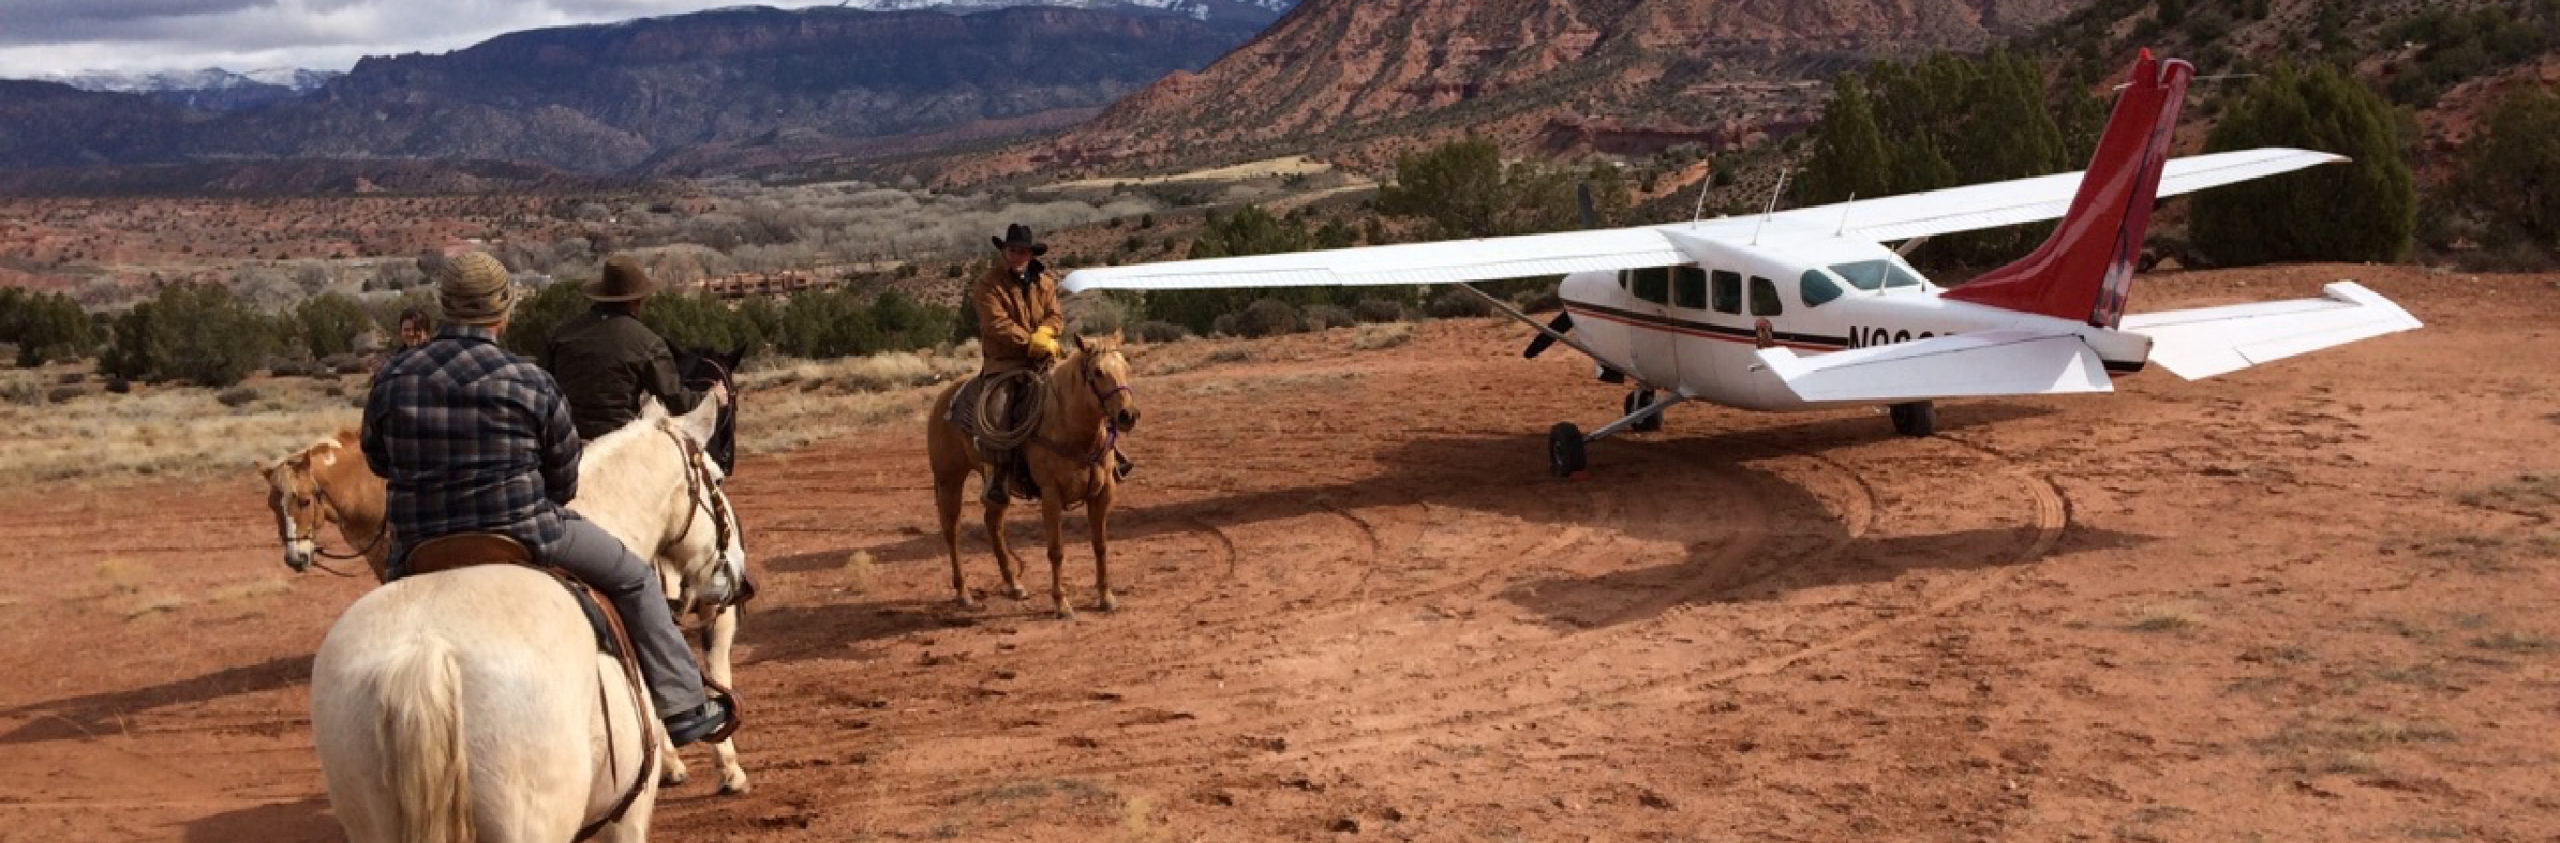 Three people on horses next to a plane in Moab